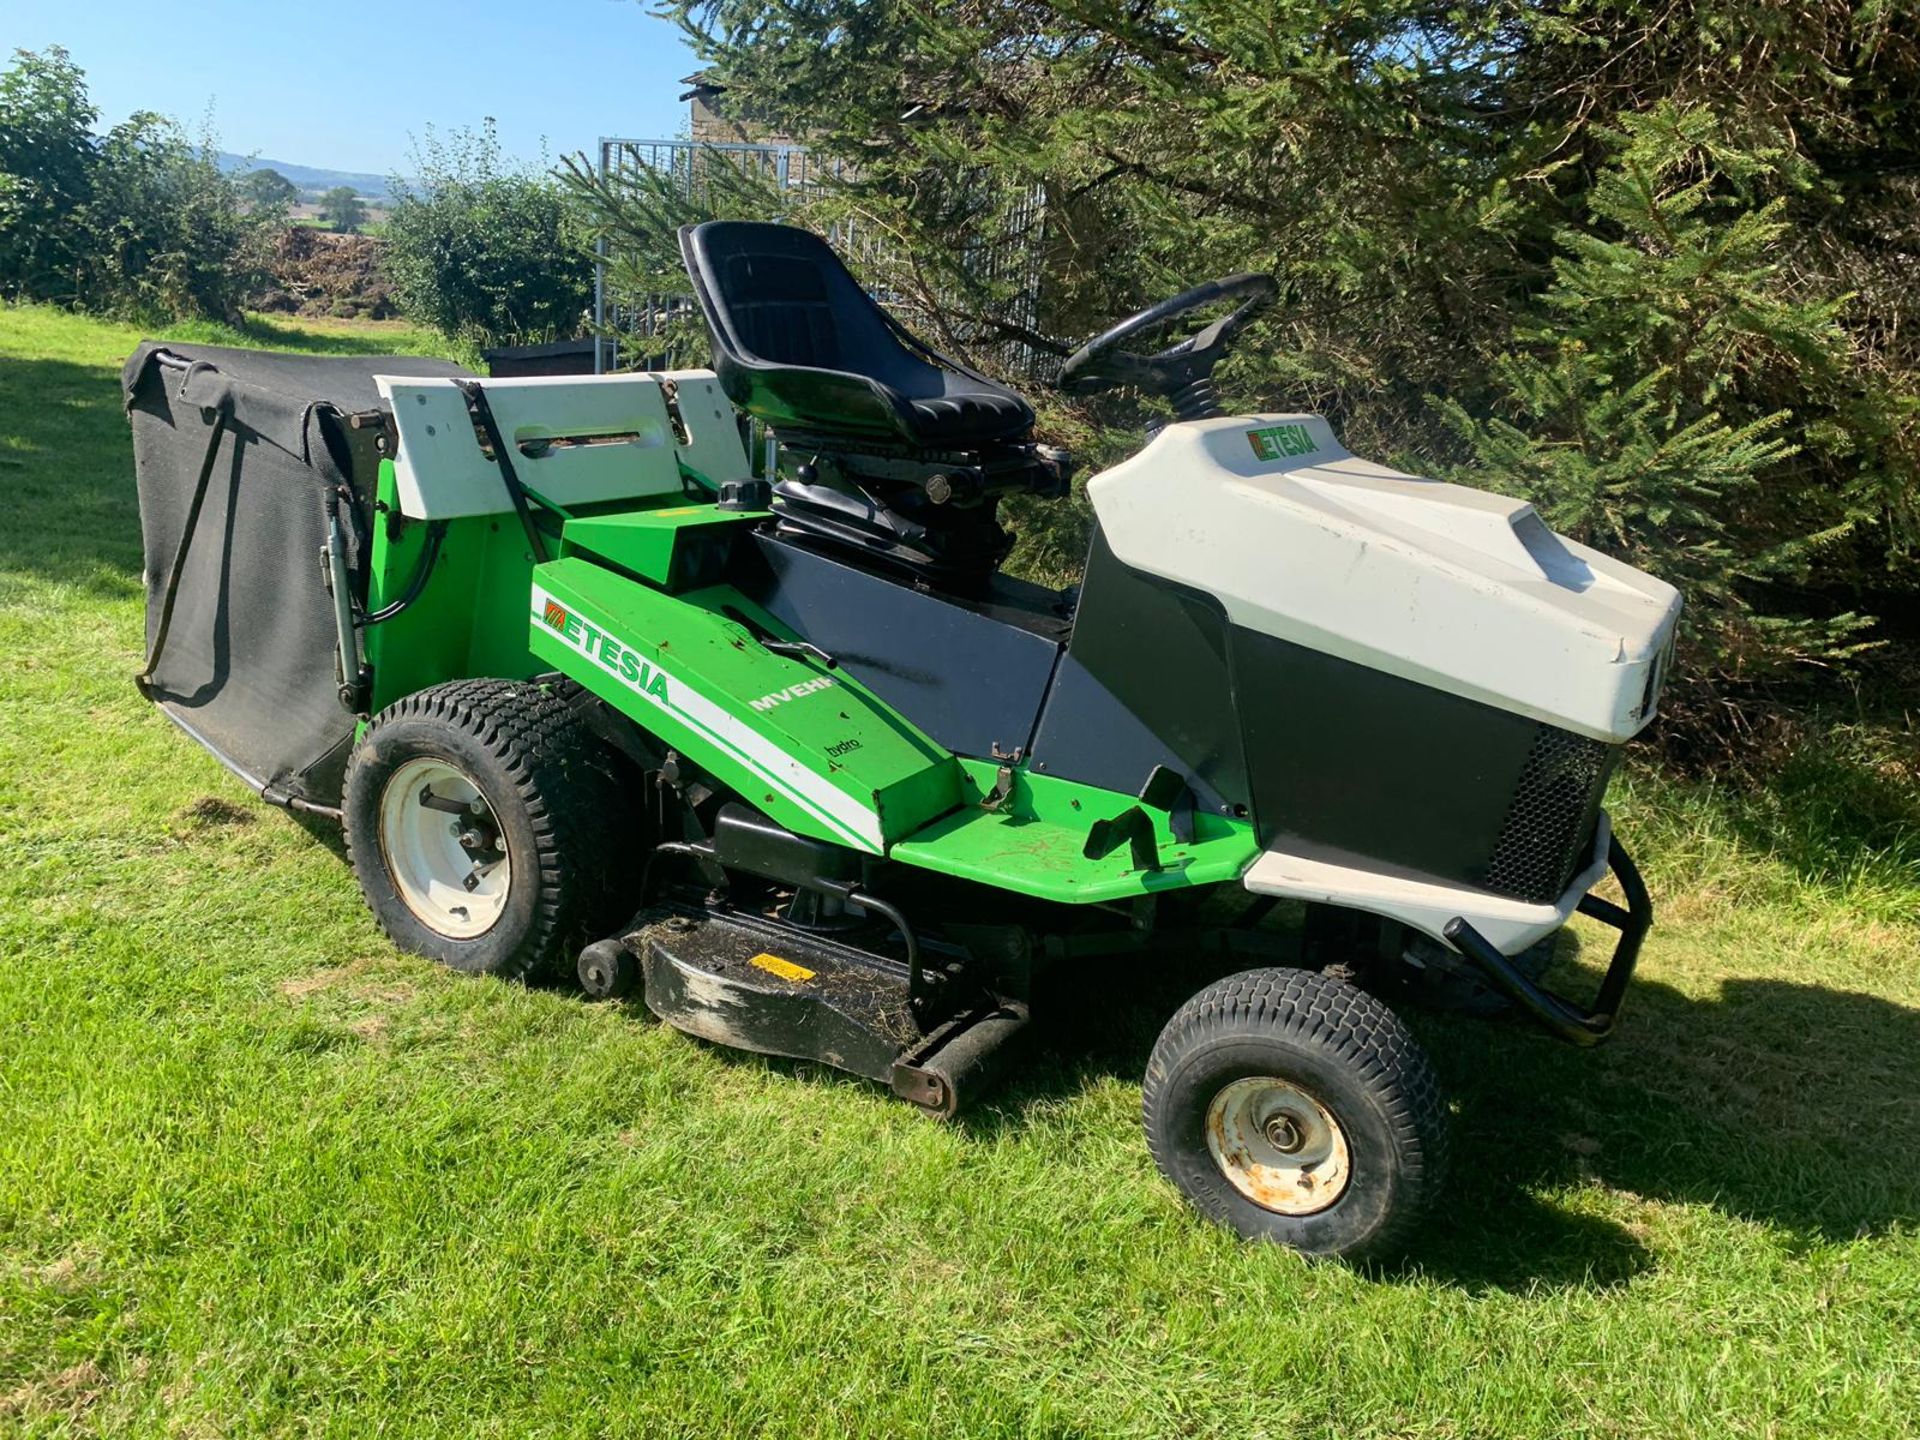 ETESIA MVEHH HYDRO RIDE ON LAWN MOWER C/W REAR GRASS COLLECTOR, RUNS, WORKS AND CUTS *PLUS VAT*